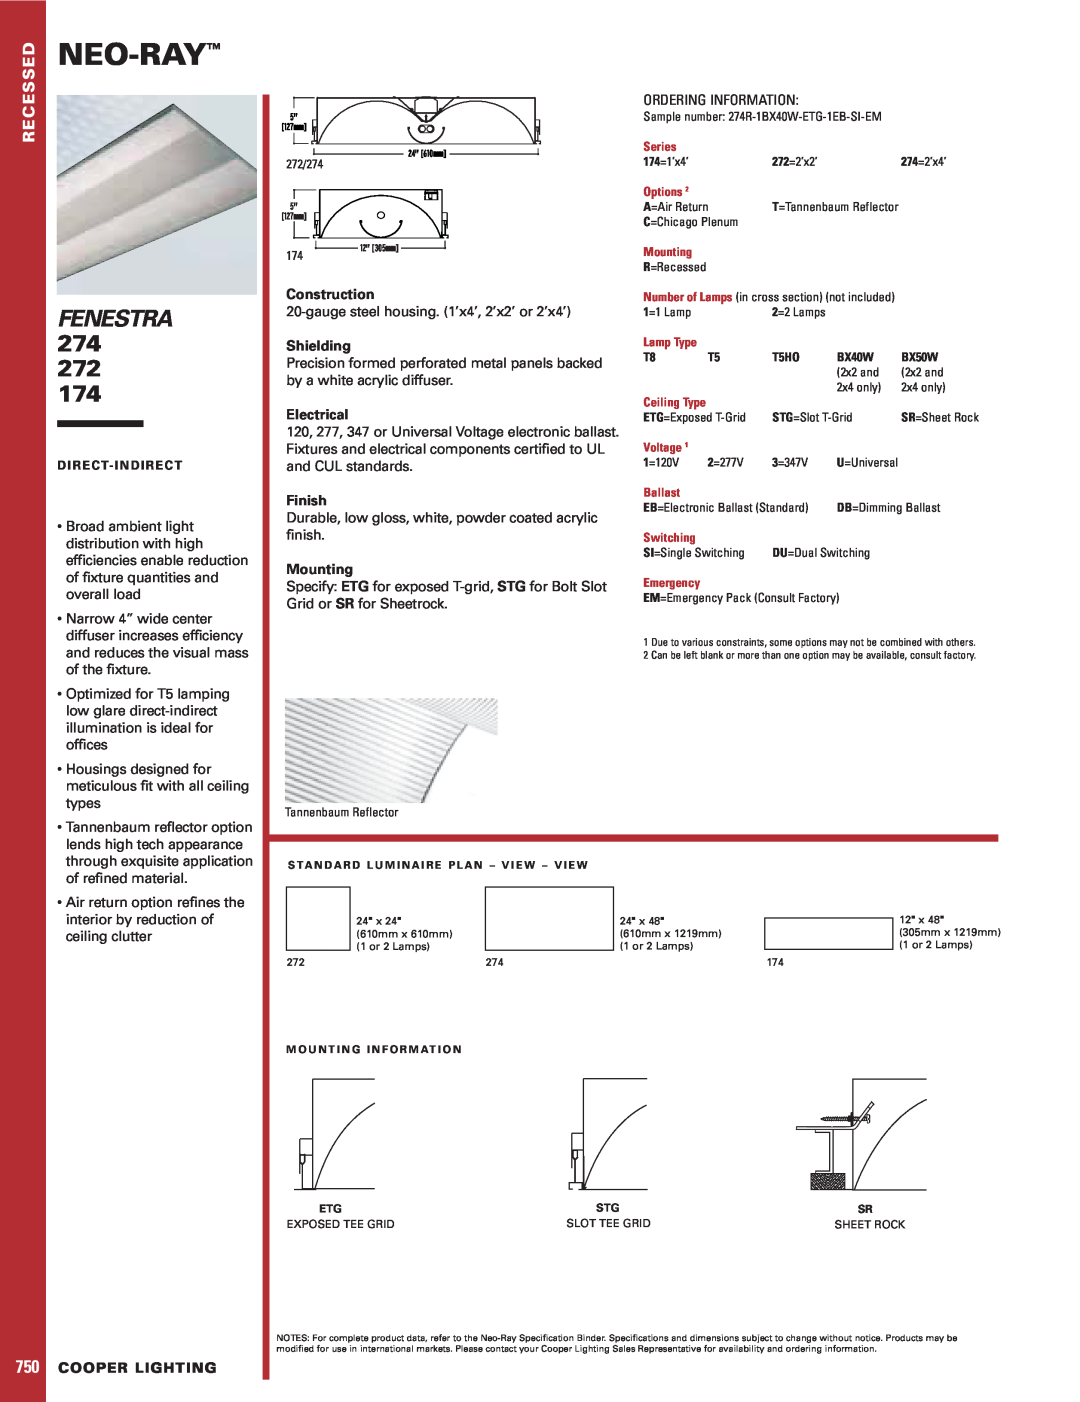 Cooper Lighting 272, 174 specifications Neo-Ray, Fenestra, Construction, Shielding, Electrical, Finish, Cooper Lighting 